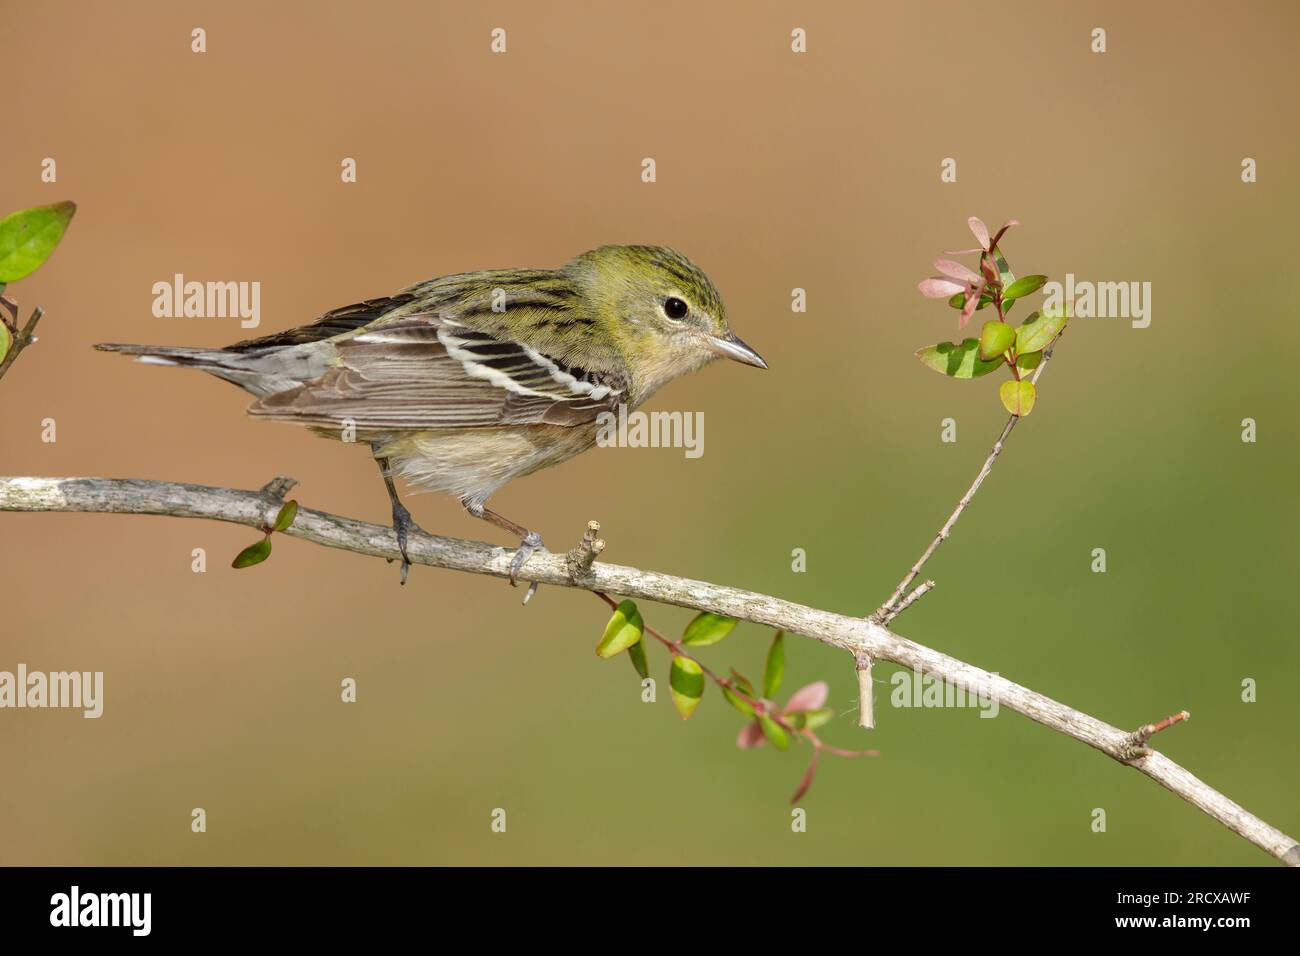 bay-breasted warbler (Setophaga castanea, Dendroica castanea), female perching on a twig, side view, USA, Texas Stock Photo